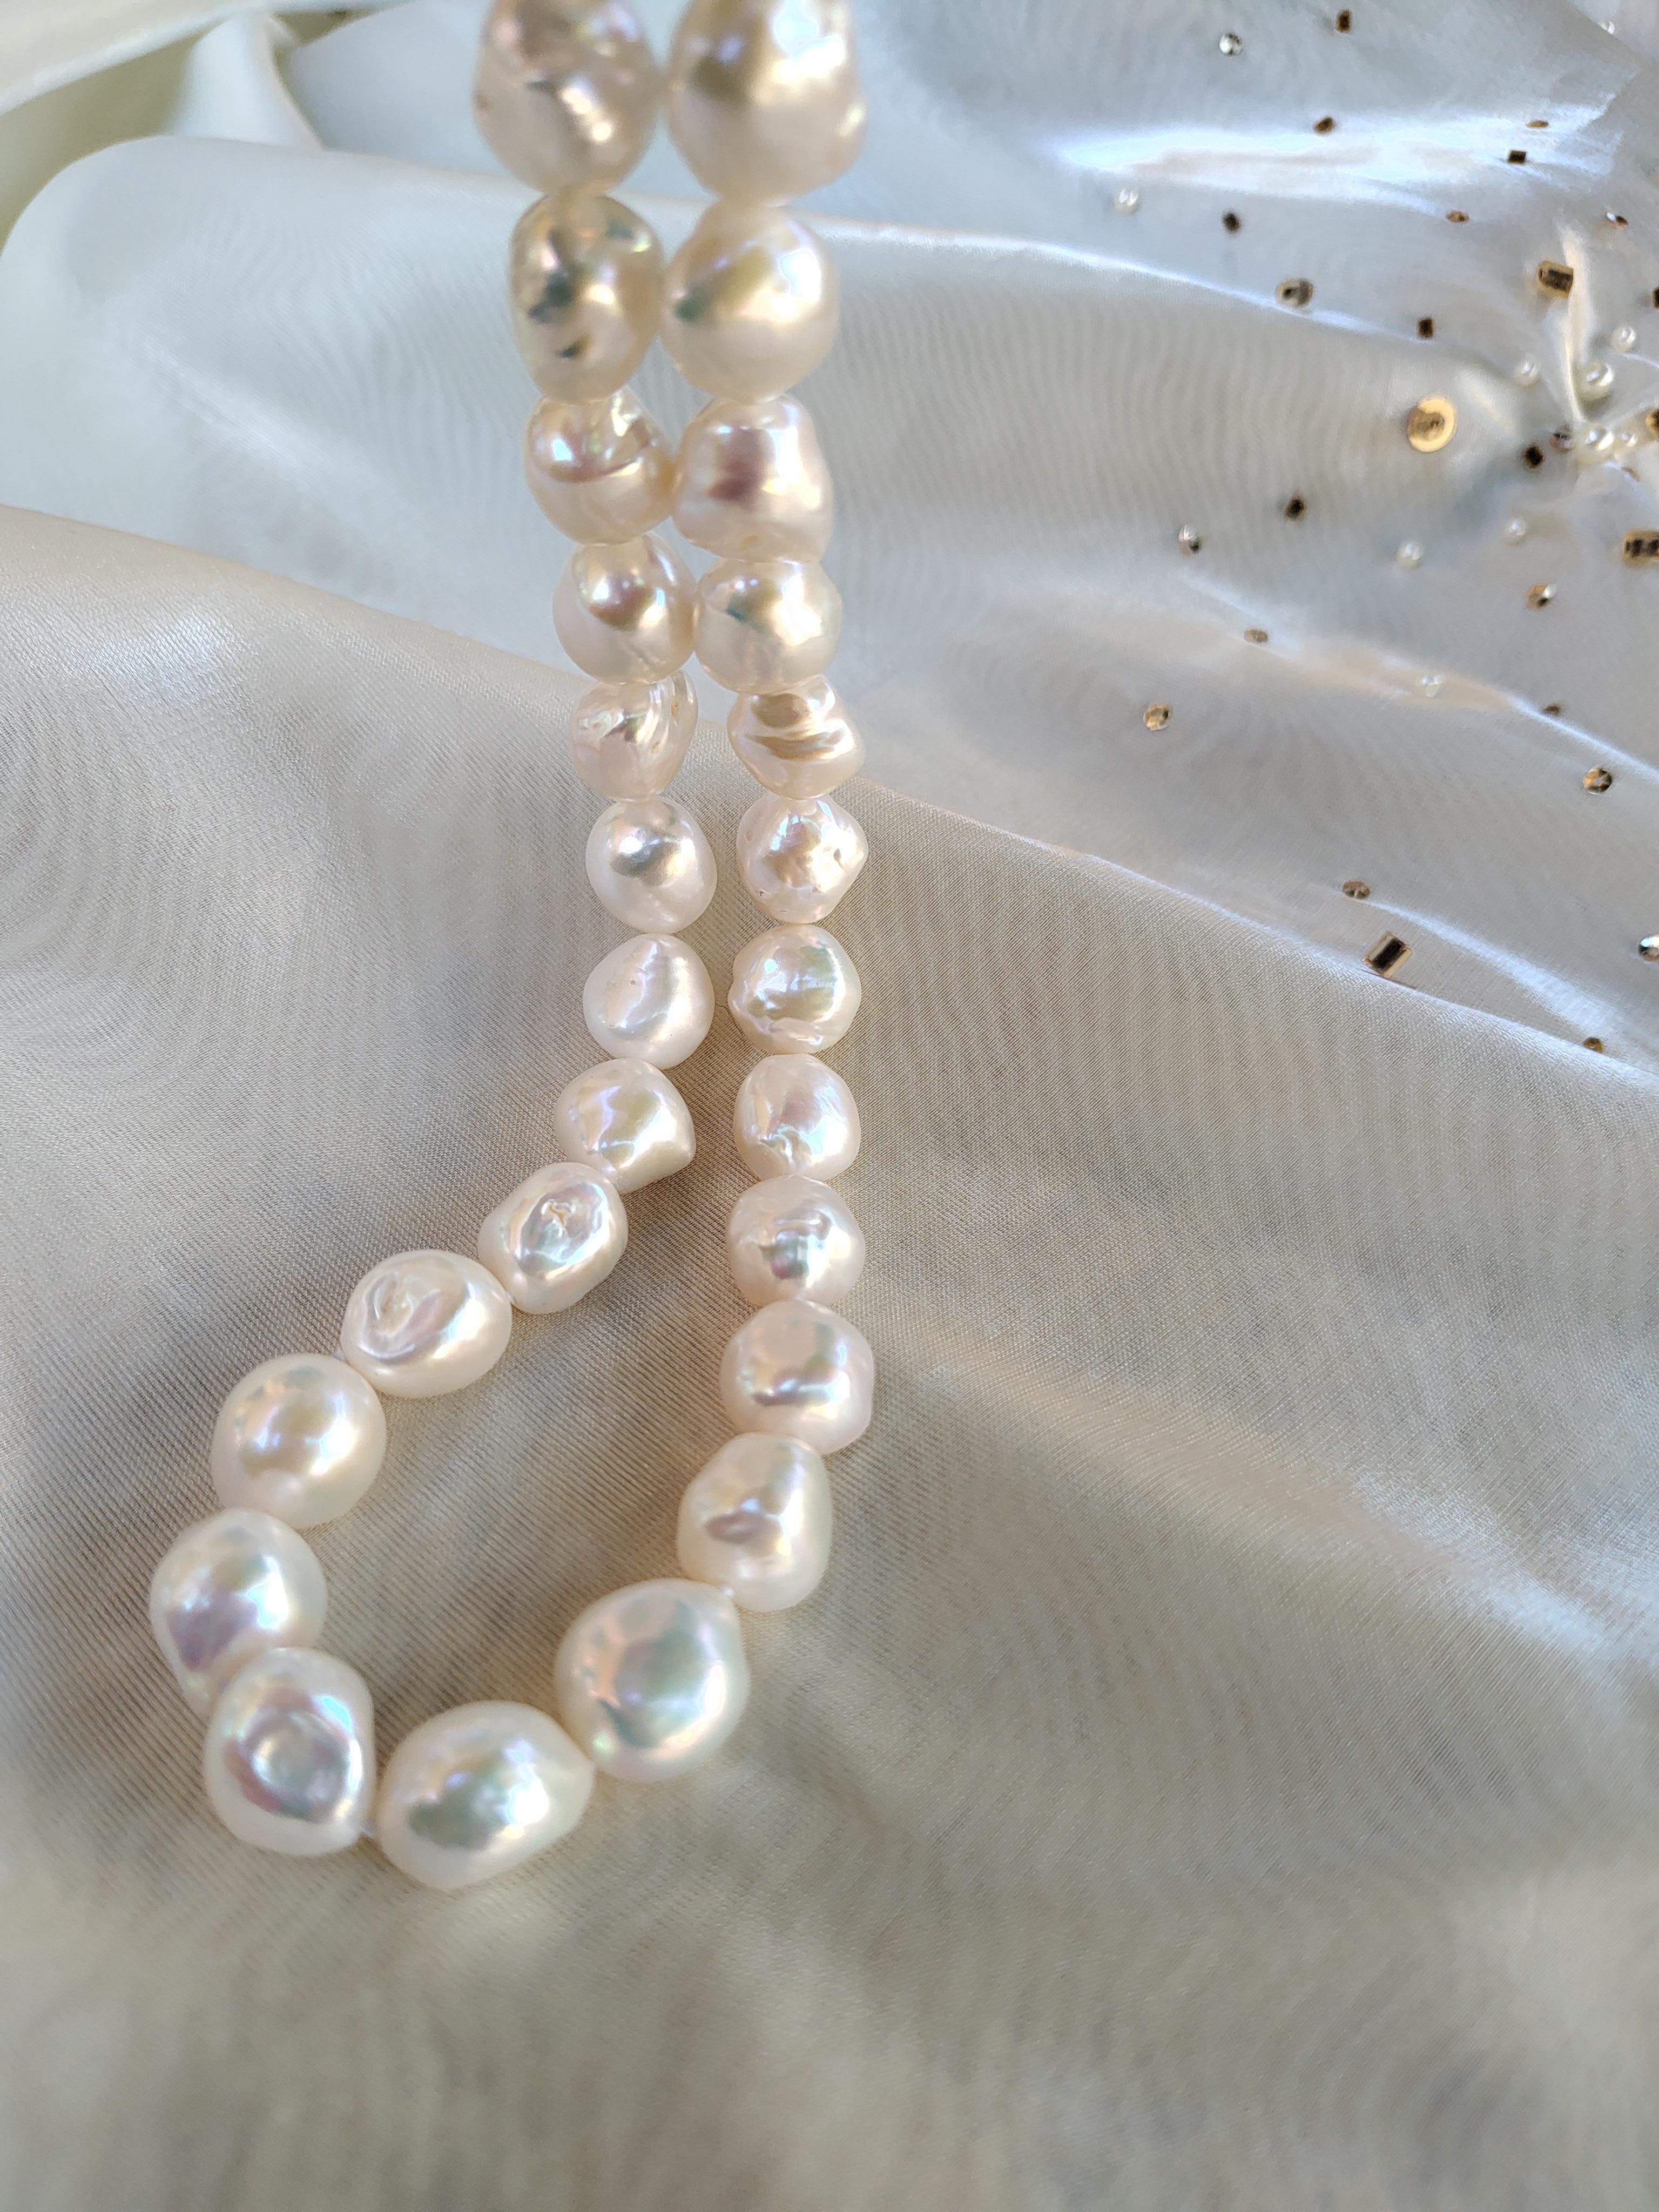 Make a statement with this exquisite Keshi pearl necklace.
Given their unique organic shapes and amazing luster, Keshi Pearls are the most unique type of pearl, making them perfect for expressing individuality. 
This piece features 30 natural fresh